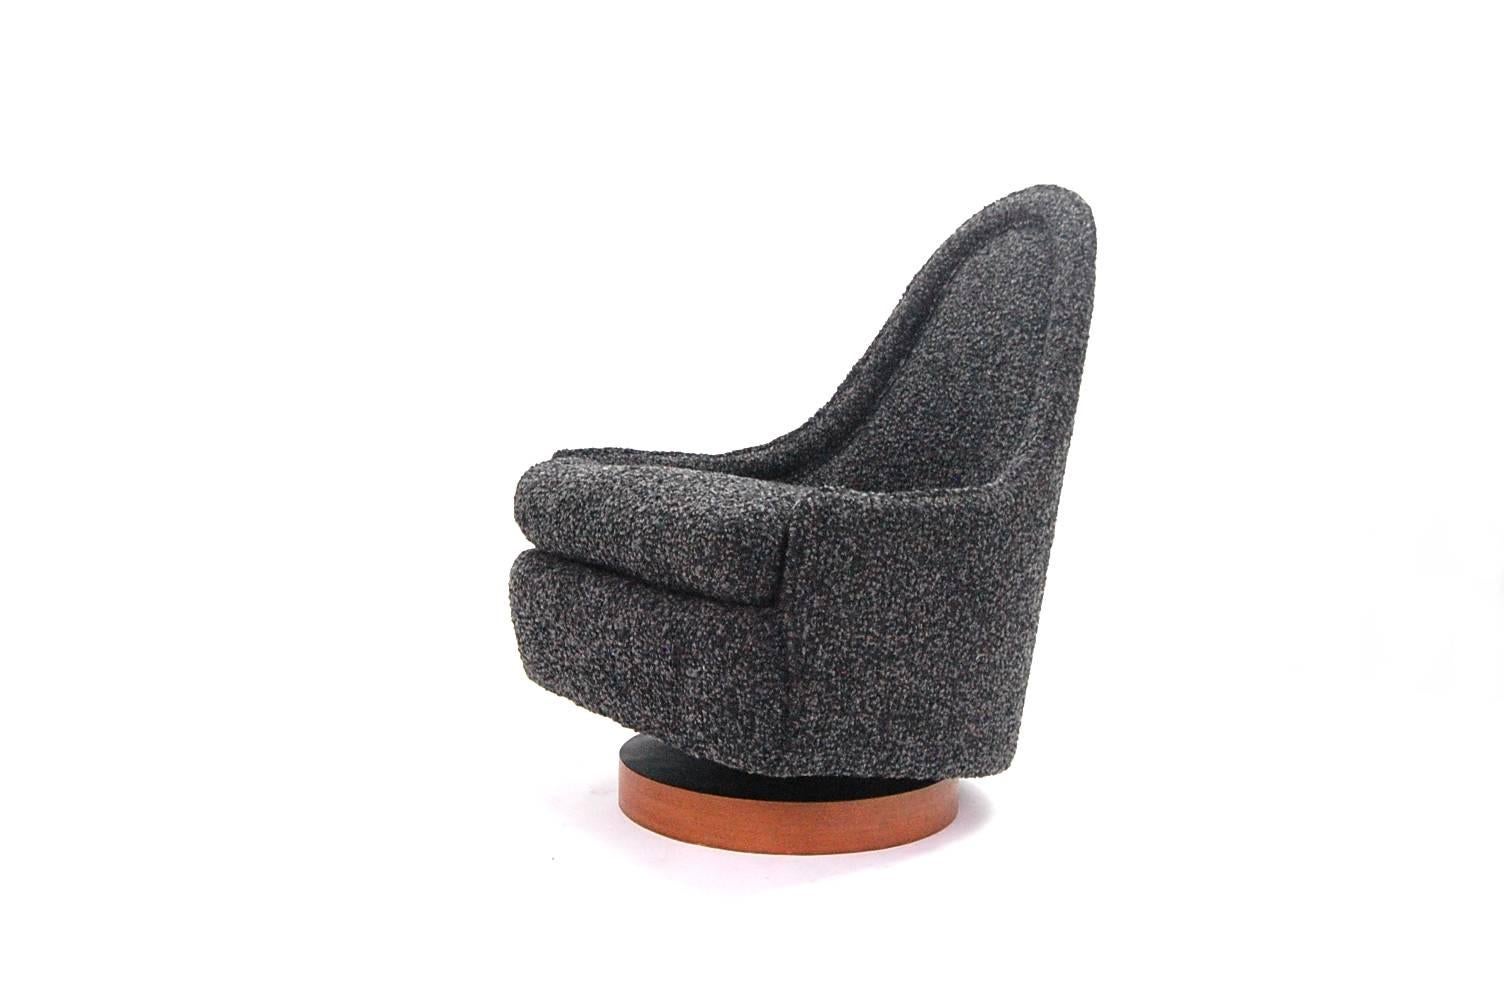 Petite chair designed by Milo Baughman for Thayer Coggin, circa 1966. Chair sits on a circular walnut veneer base, and swivels. It also has a spring mechanism, so it rocks as well. Professionally reupholstered in a black and grey wool cashmere woven